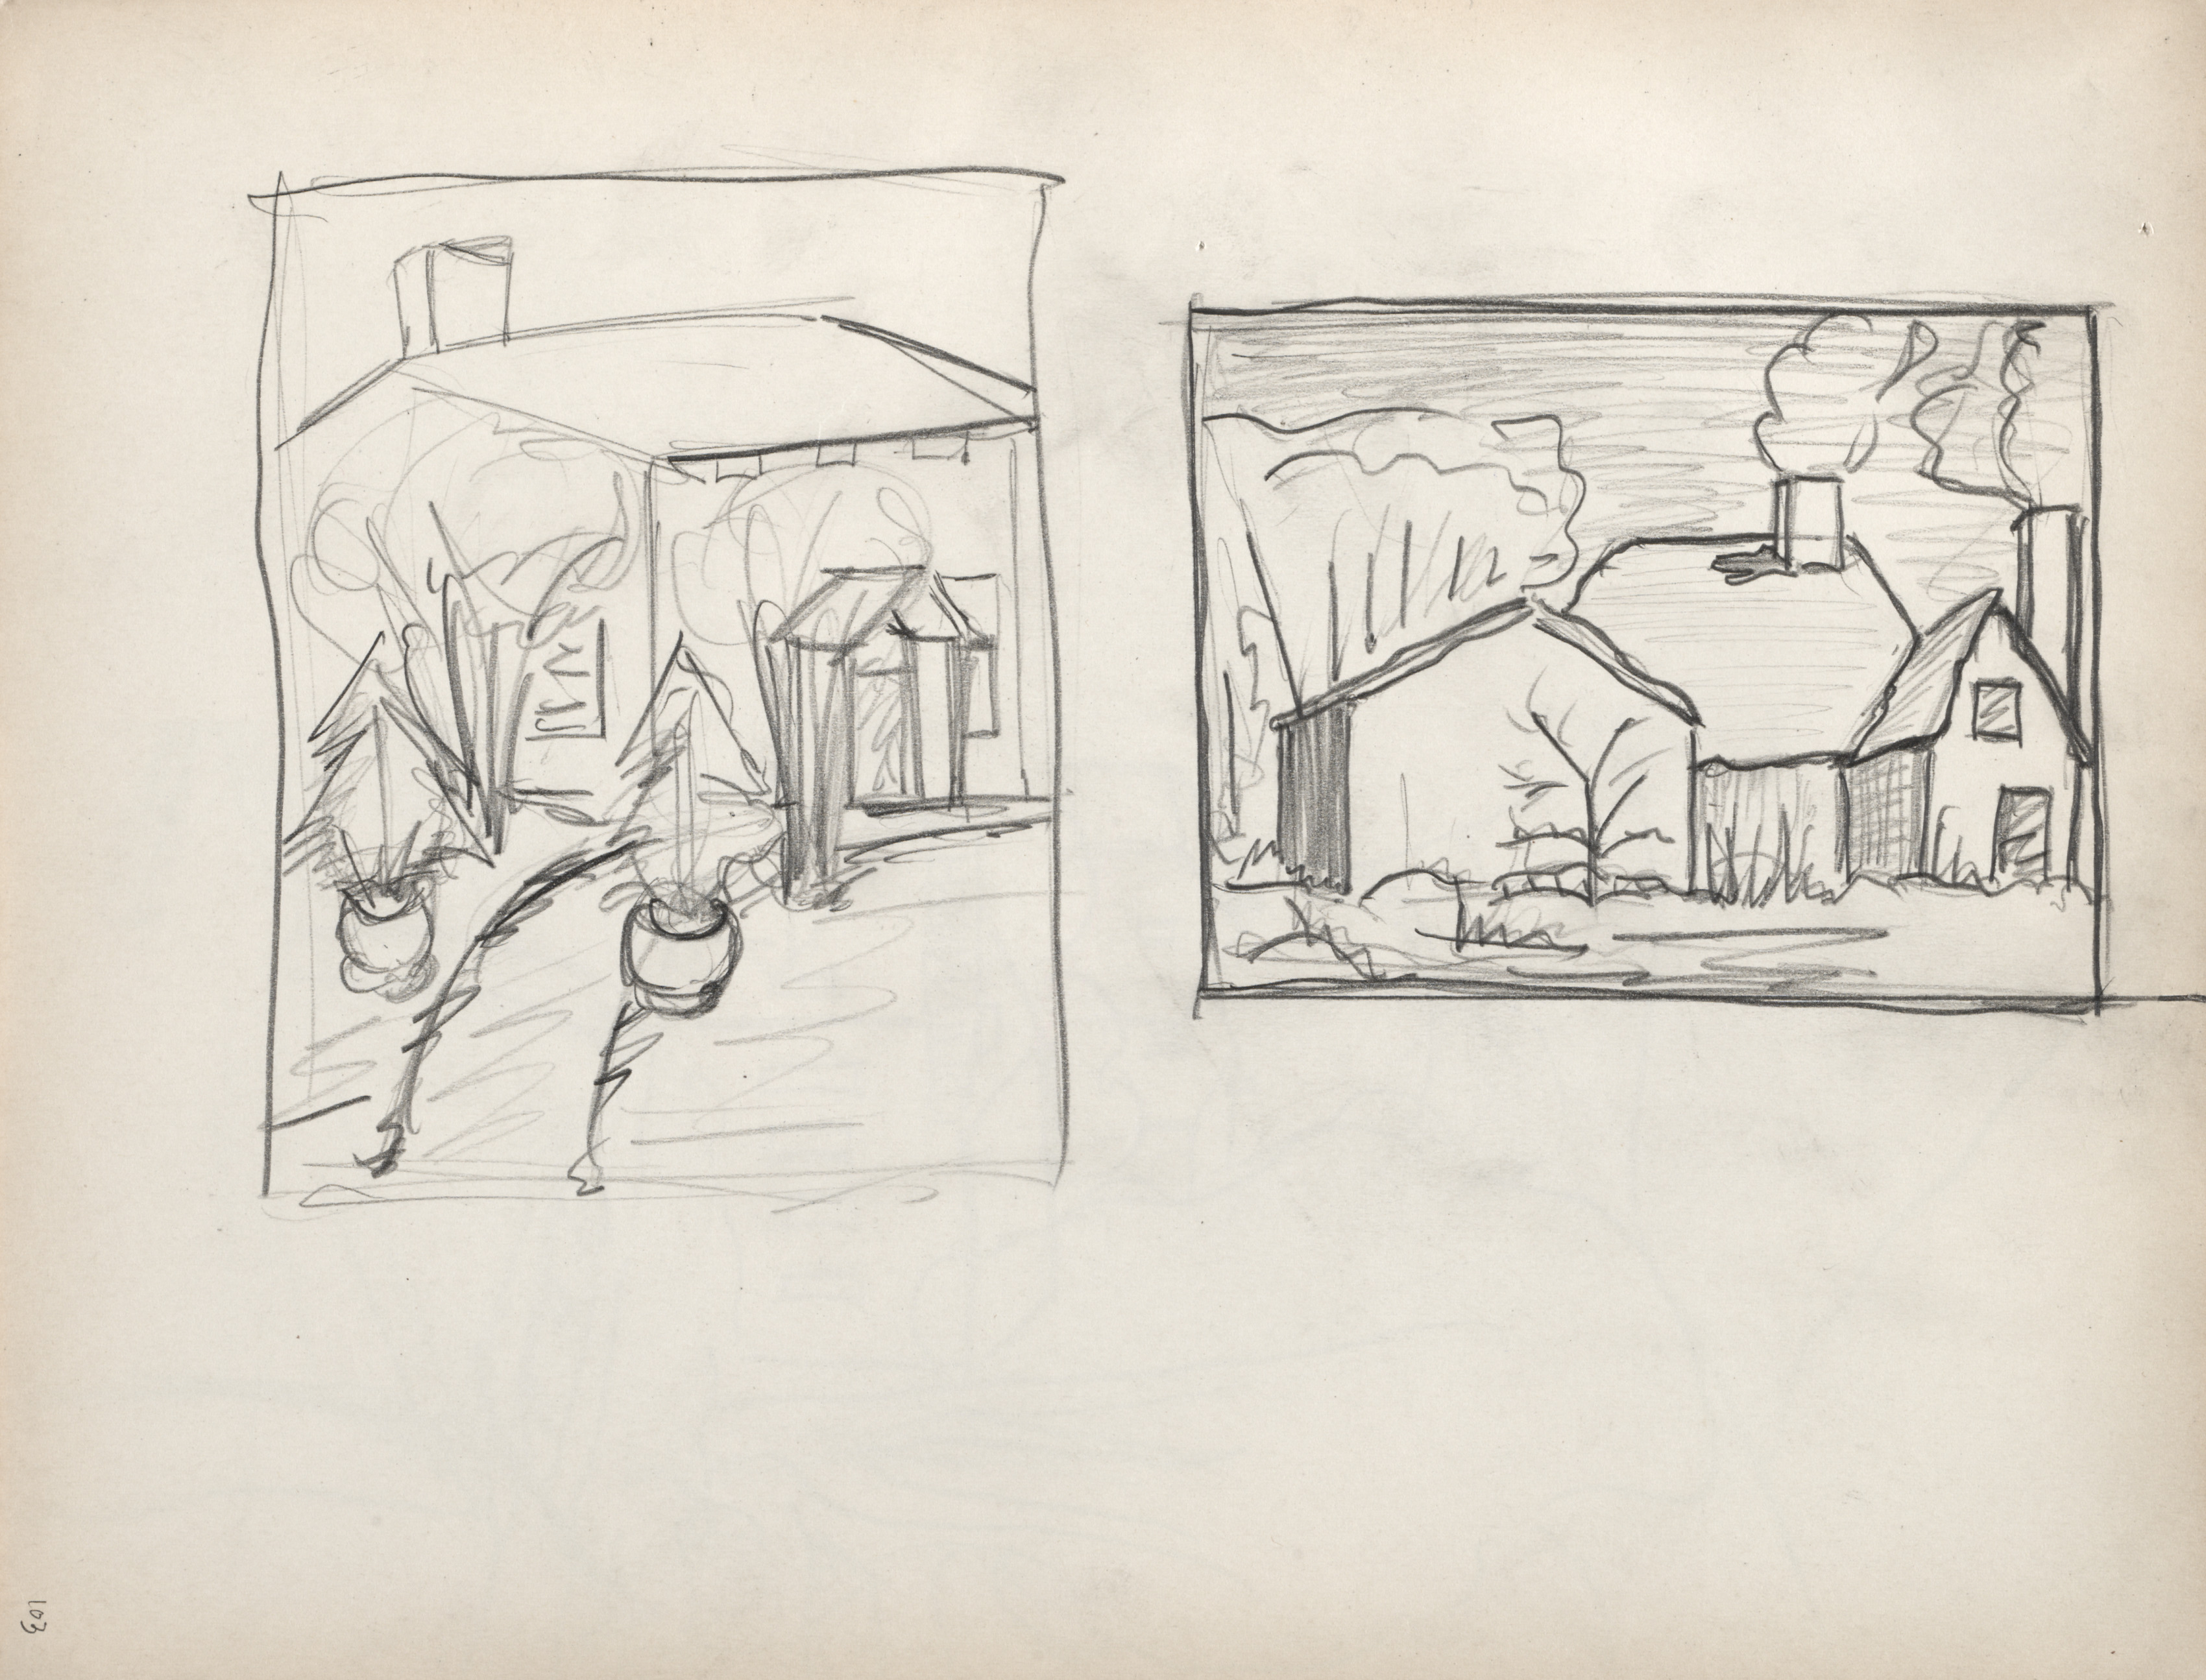 Sketchbook No. 2, page 103: Two vignettes of houses